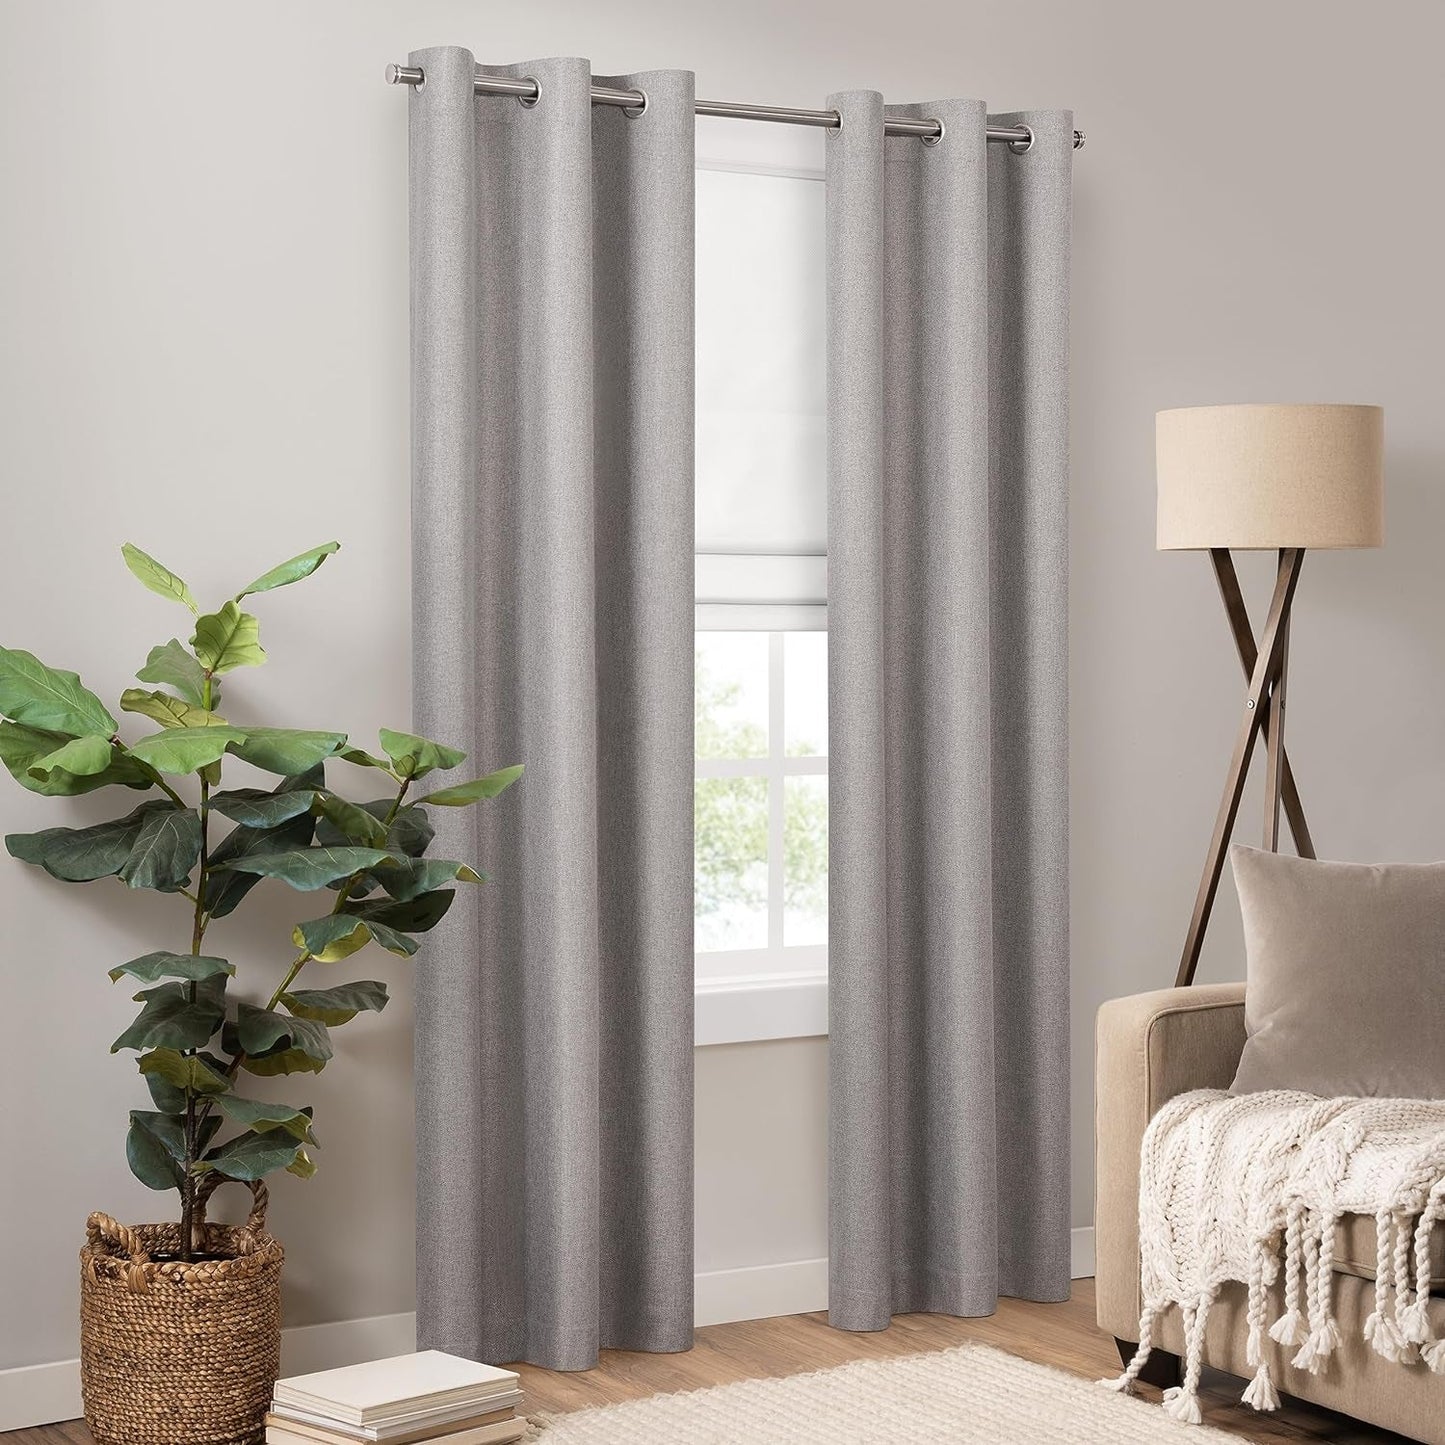 Eclipse Lane Cordless Roman Shades for Windows, Room Darkening, 27 in Wide X 64 in Long, Noise Reducing and Energy Efficient Window Treatments for Living Room, Bedroom or Office, Grey